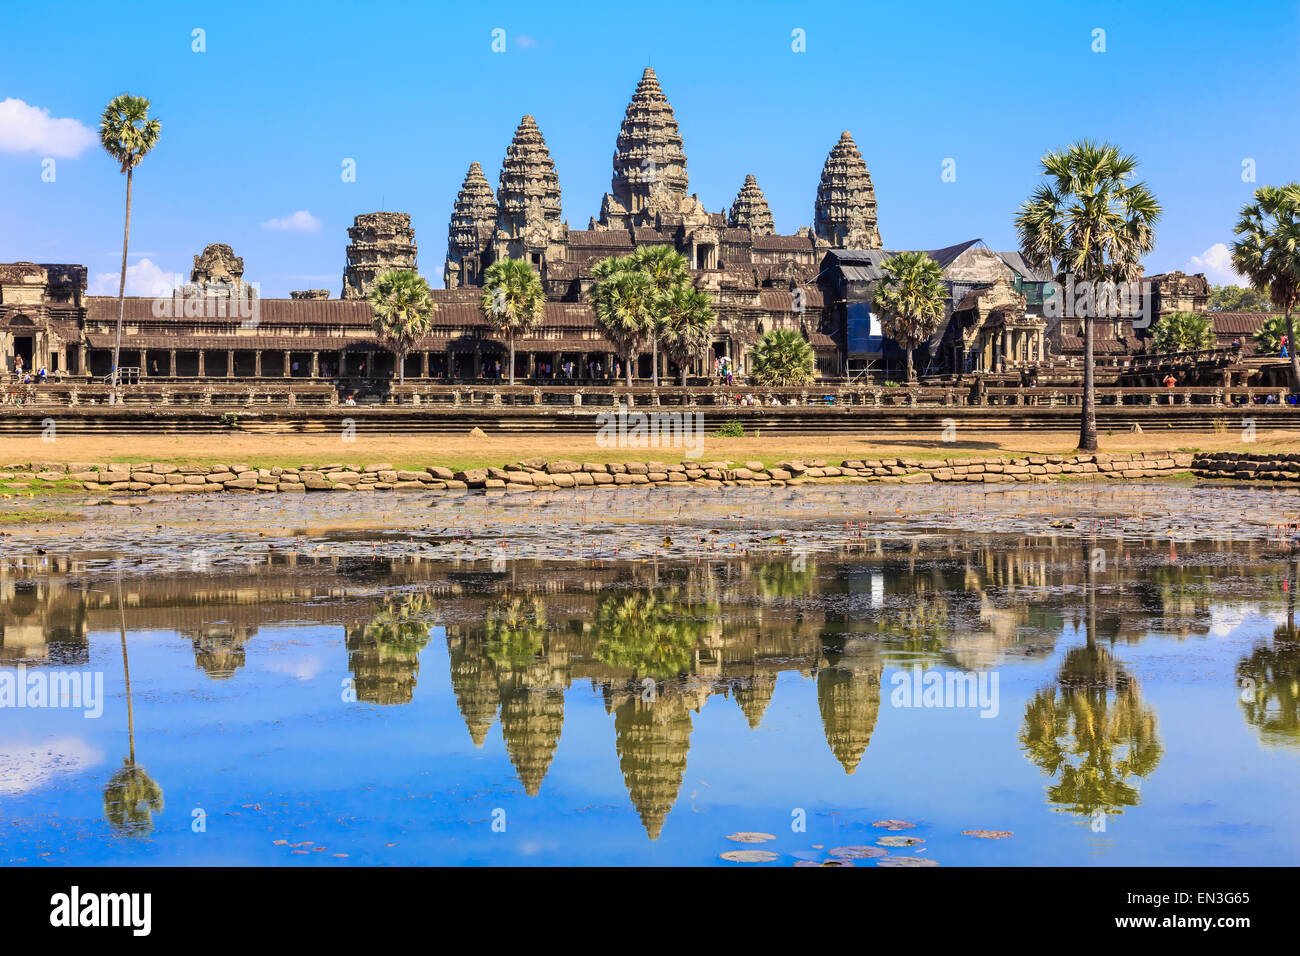 Ancient temple Angkor Wat from across the lake. The largest religious monument in the world. Siem Reap, Cambodia Stock Photo